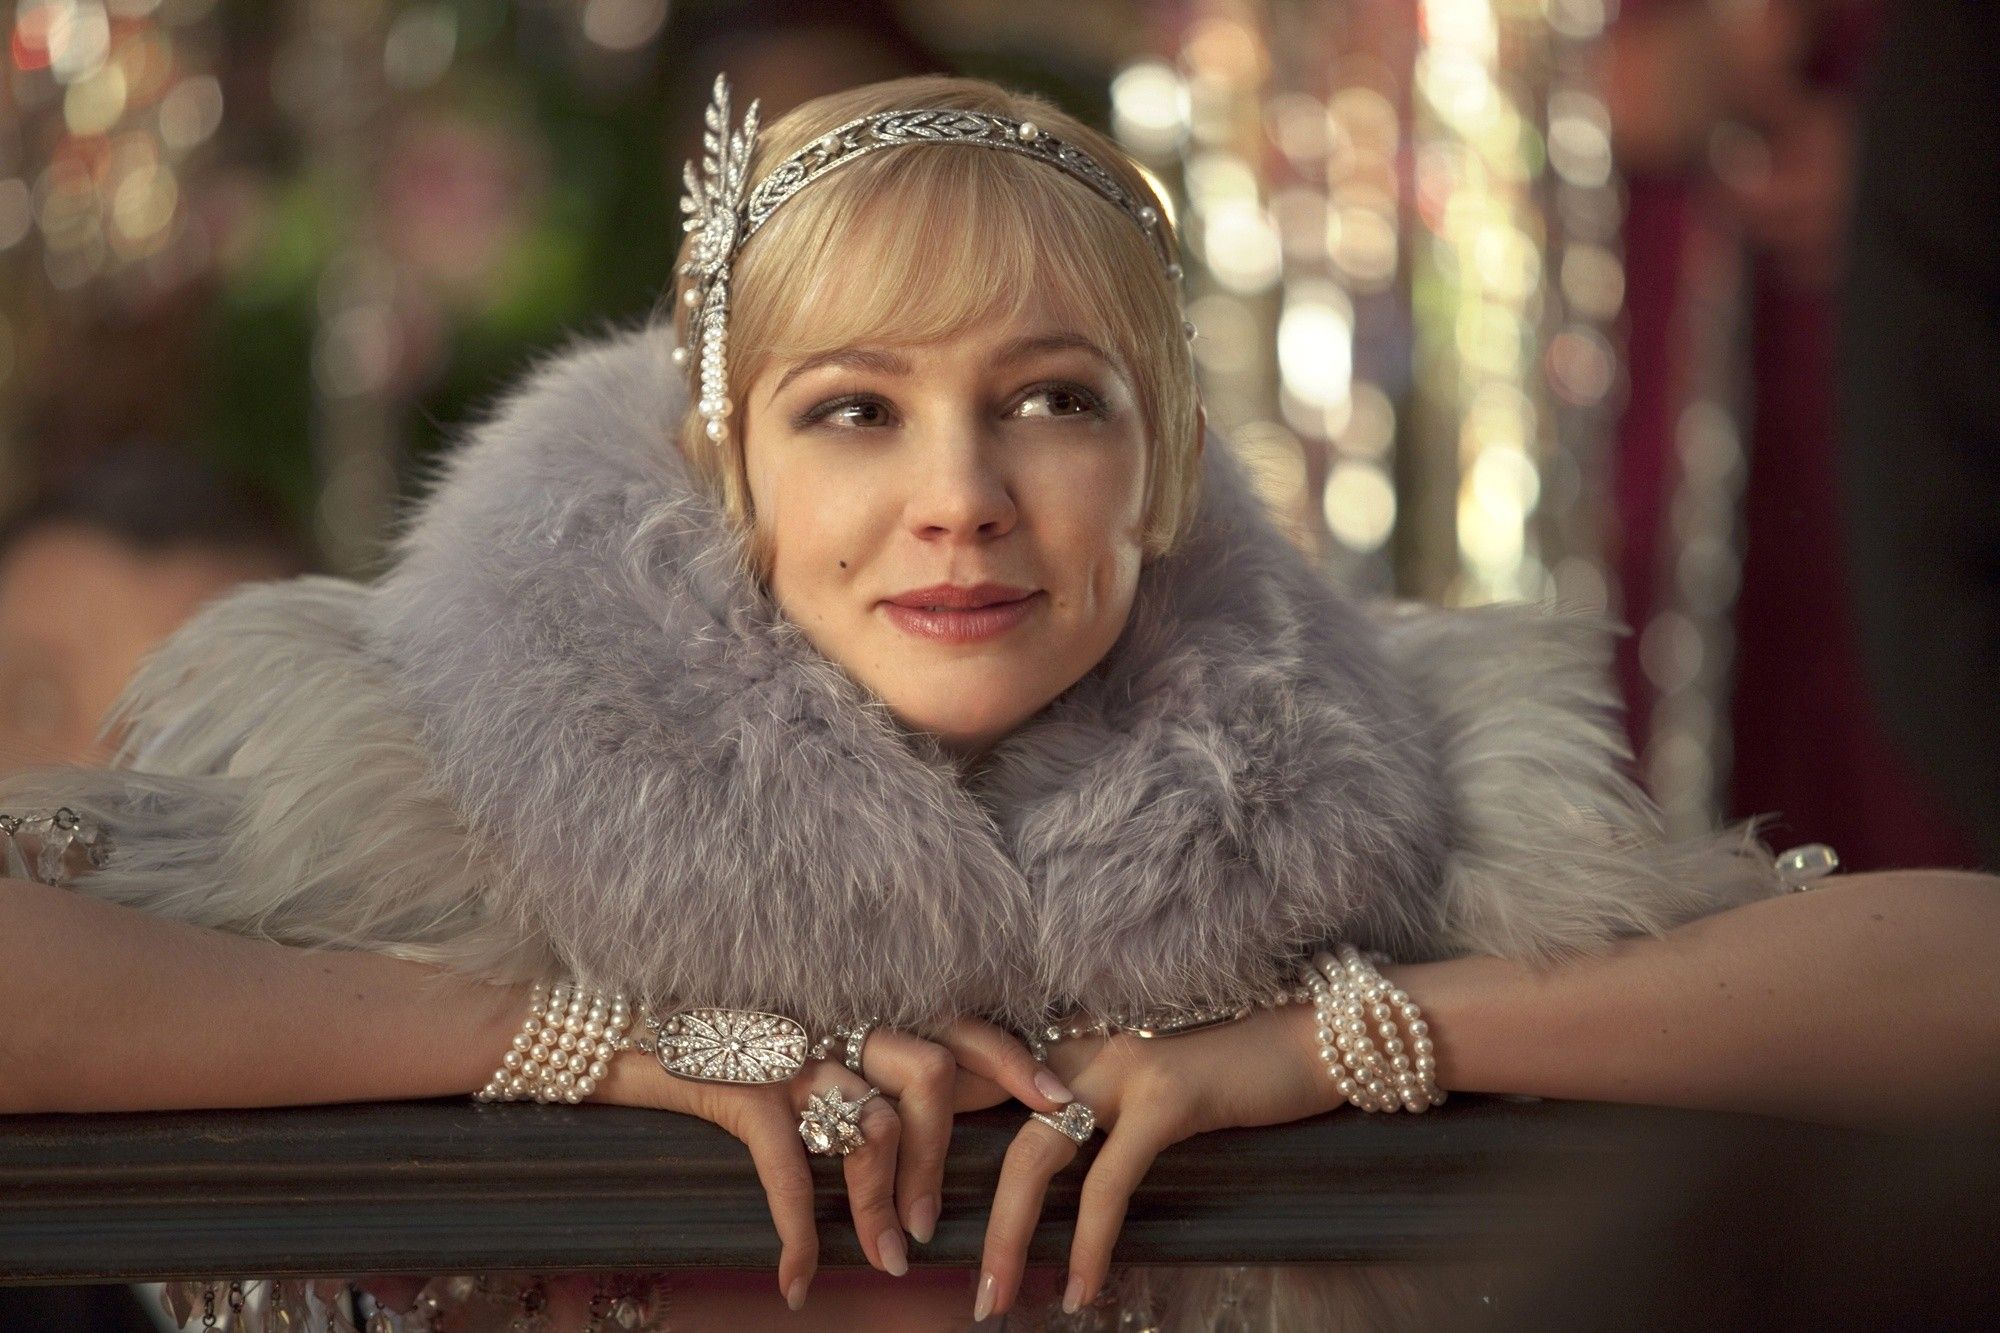 Carey Mulligan stars as Daisy Buchanan in Warner Bros. Pictures' The Great Gatsby (2013)